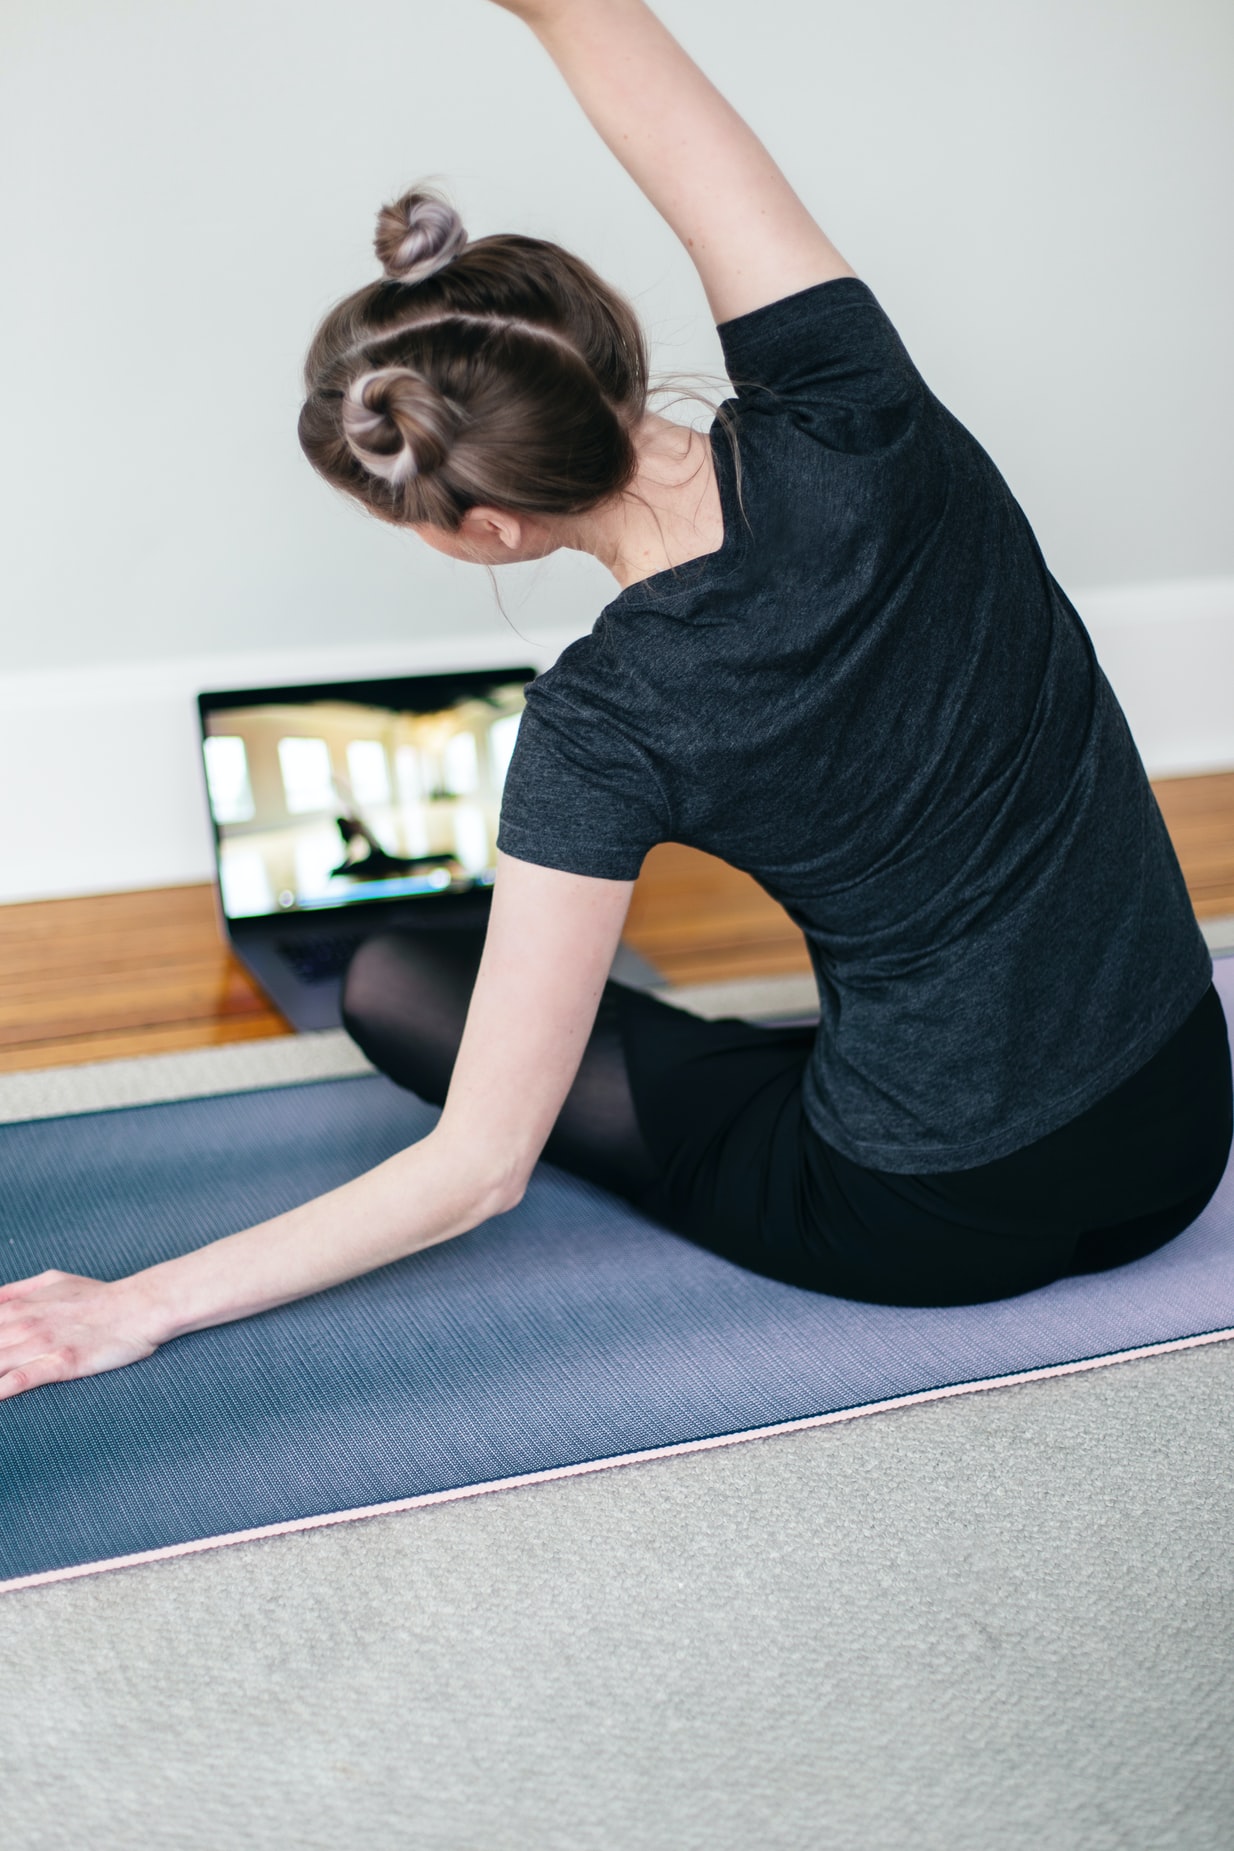 Learn some yoga or Pilates stretches for shoulders, legs and abs that you can do in moments of downtime: waiting for the kettle to boil, at your desk during a conference call or standing after you’ve finished a piece of work.